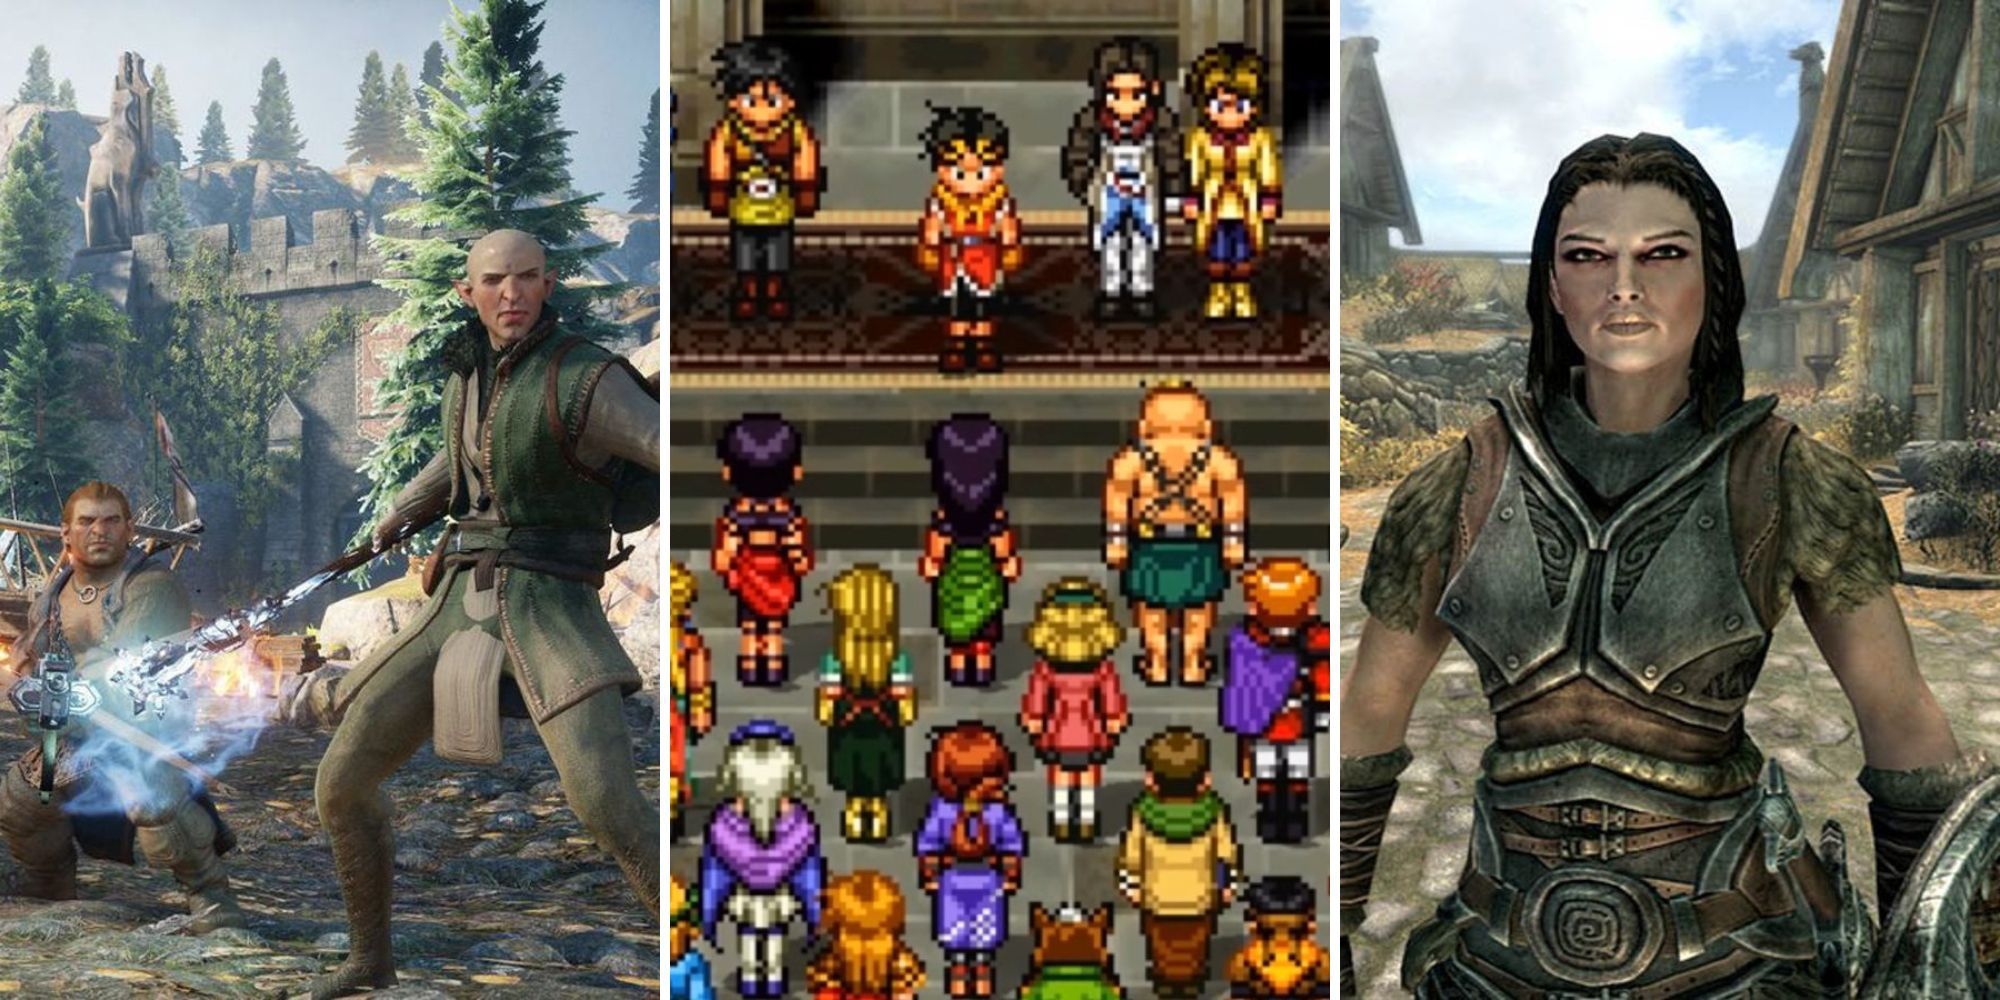 A grid showing companions from the games Dragon Age: Inquisition, Suikoden, and Skyrim